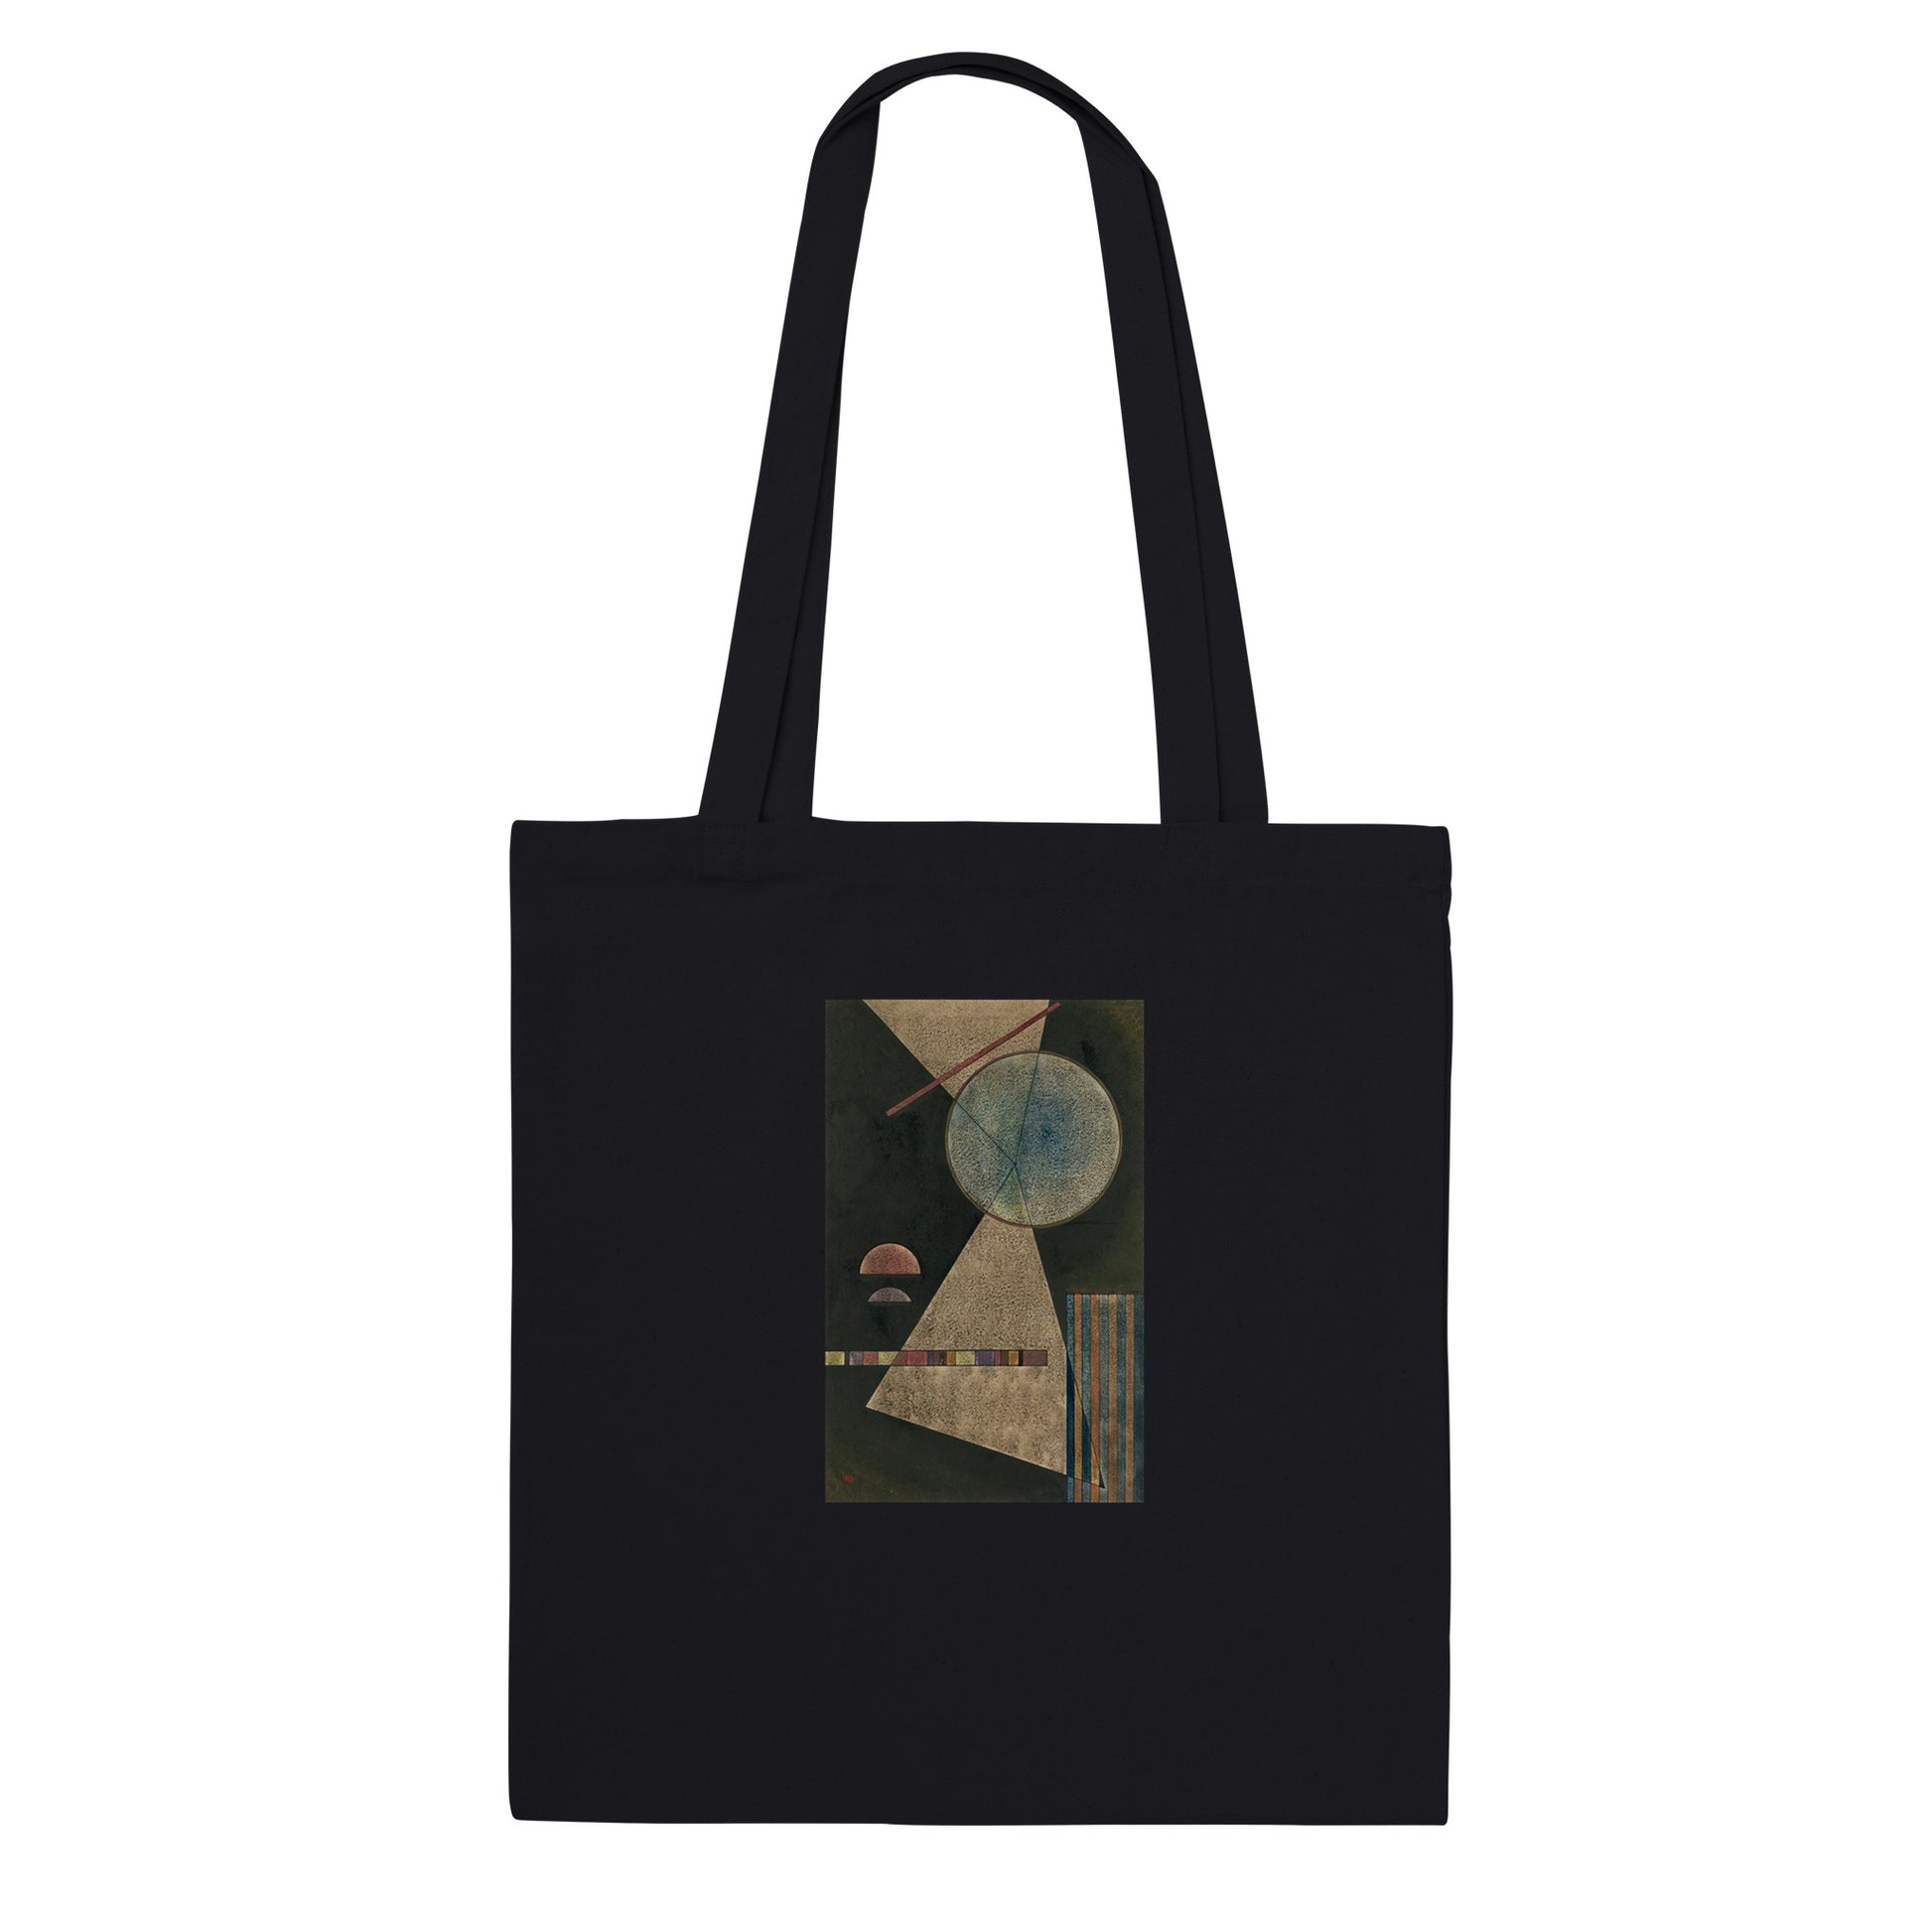 WASSILY KANDINSKY - TREFFPUNKT (MEETING - POINT) (1928) - CLASSIC TOTE BAG